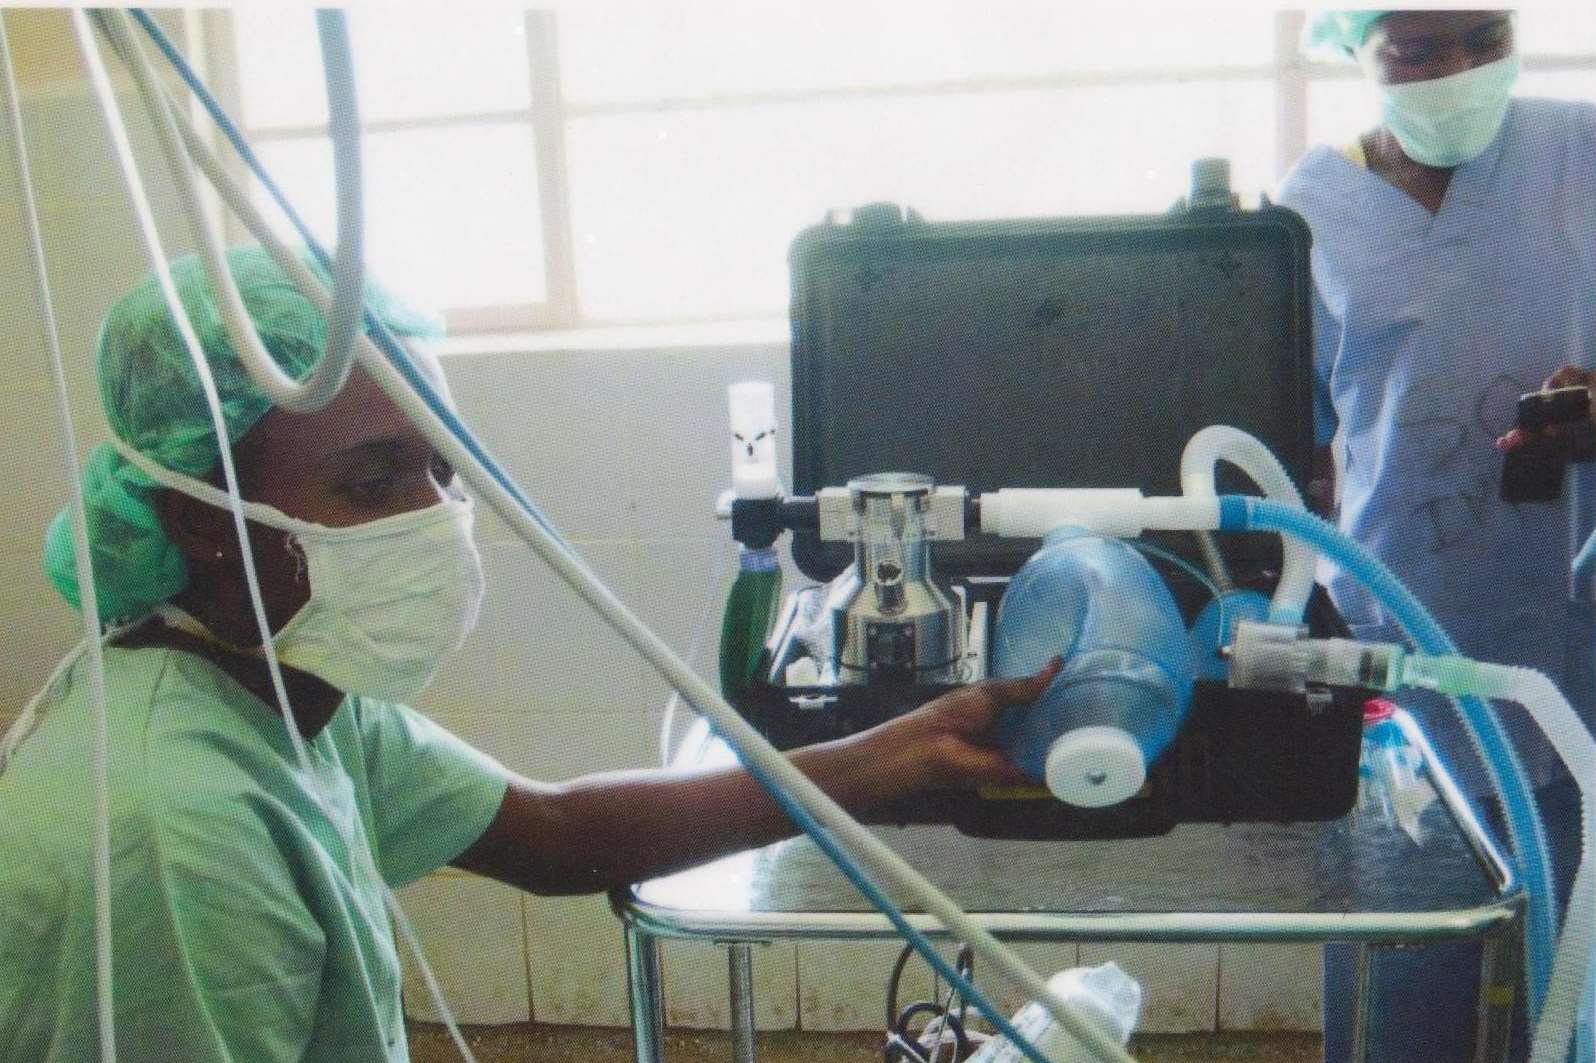 The Glostavent being used in a hospital in Africa